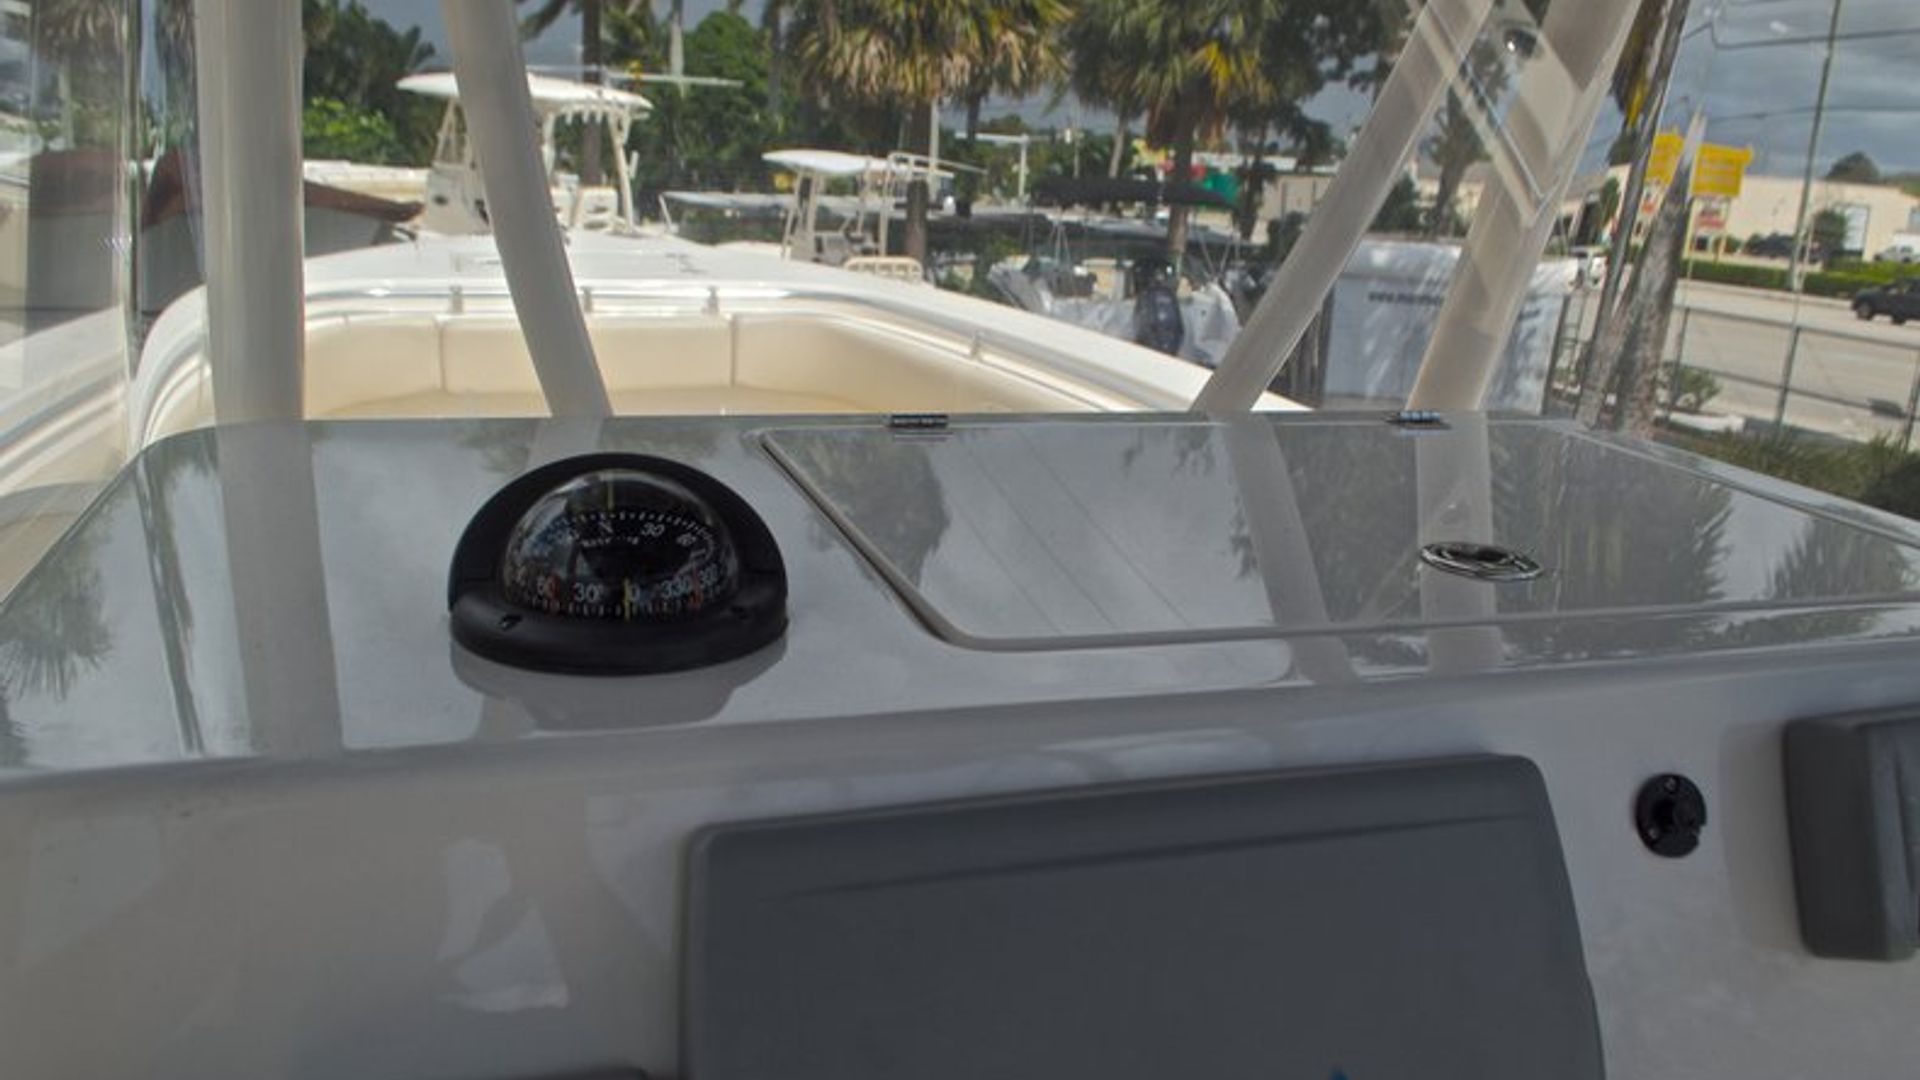 Used 2013 Cobia 296 Center Console #N013 image 25